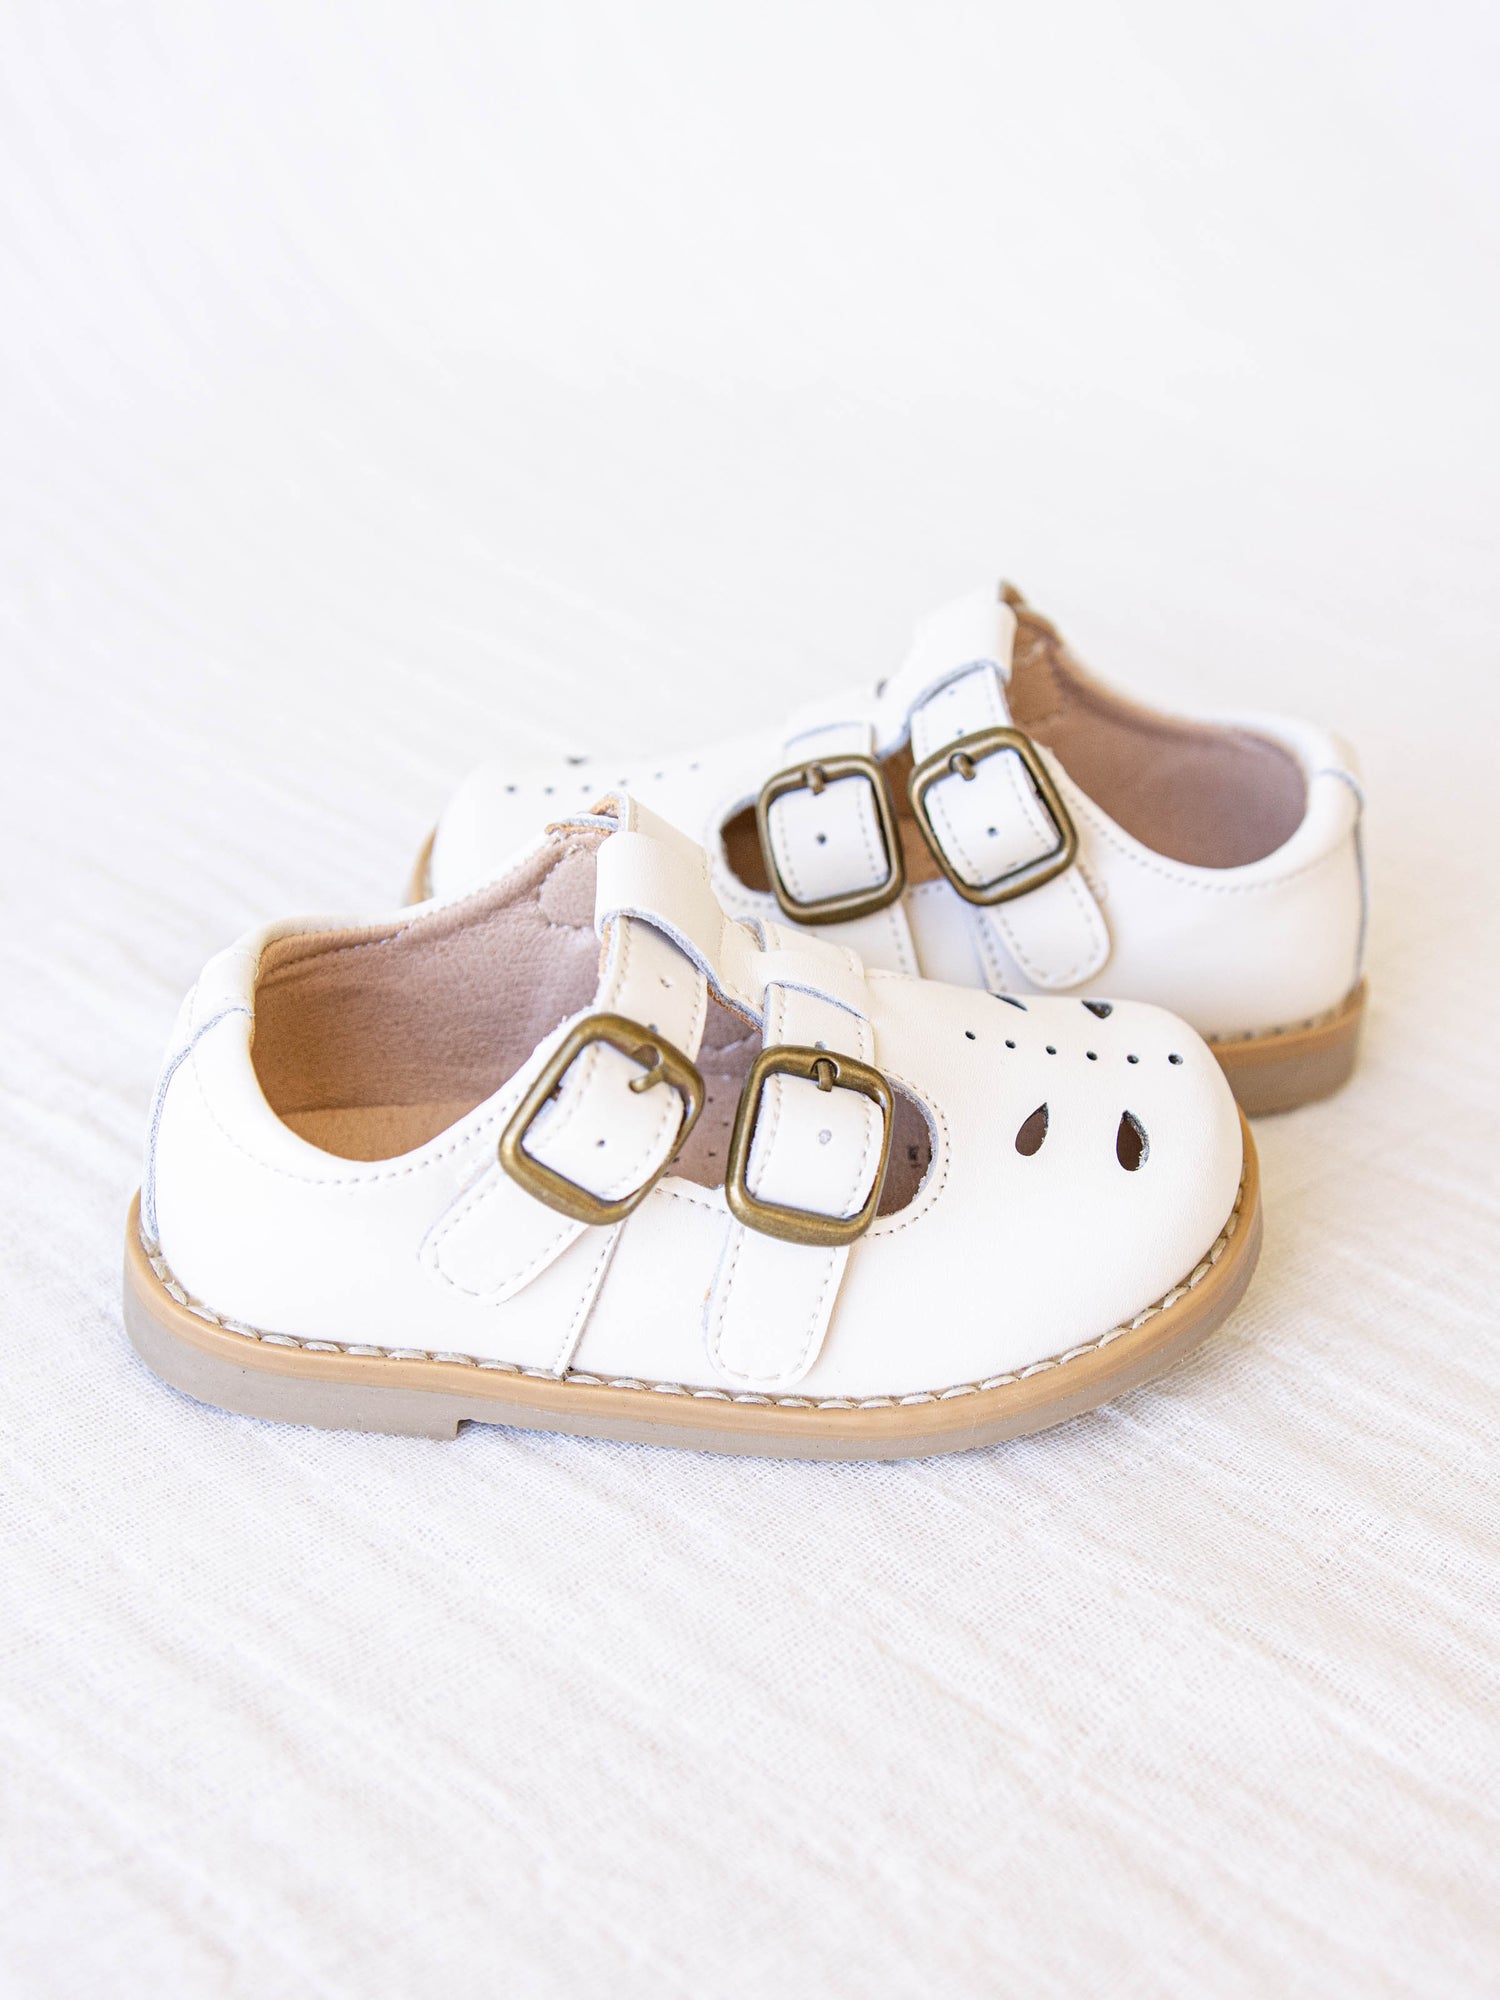 A pair of dove (white) colored genuine leather rubber soled shoes with two adjustable metal buckles and cut out detail across the toe area in a dragonfly type pattern. 